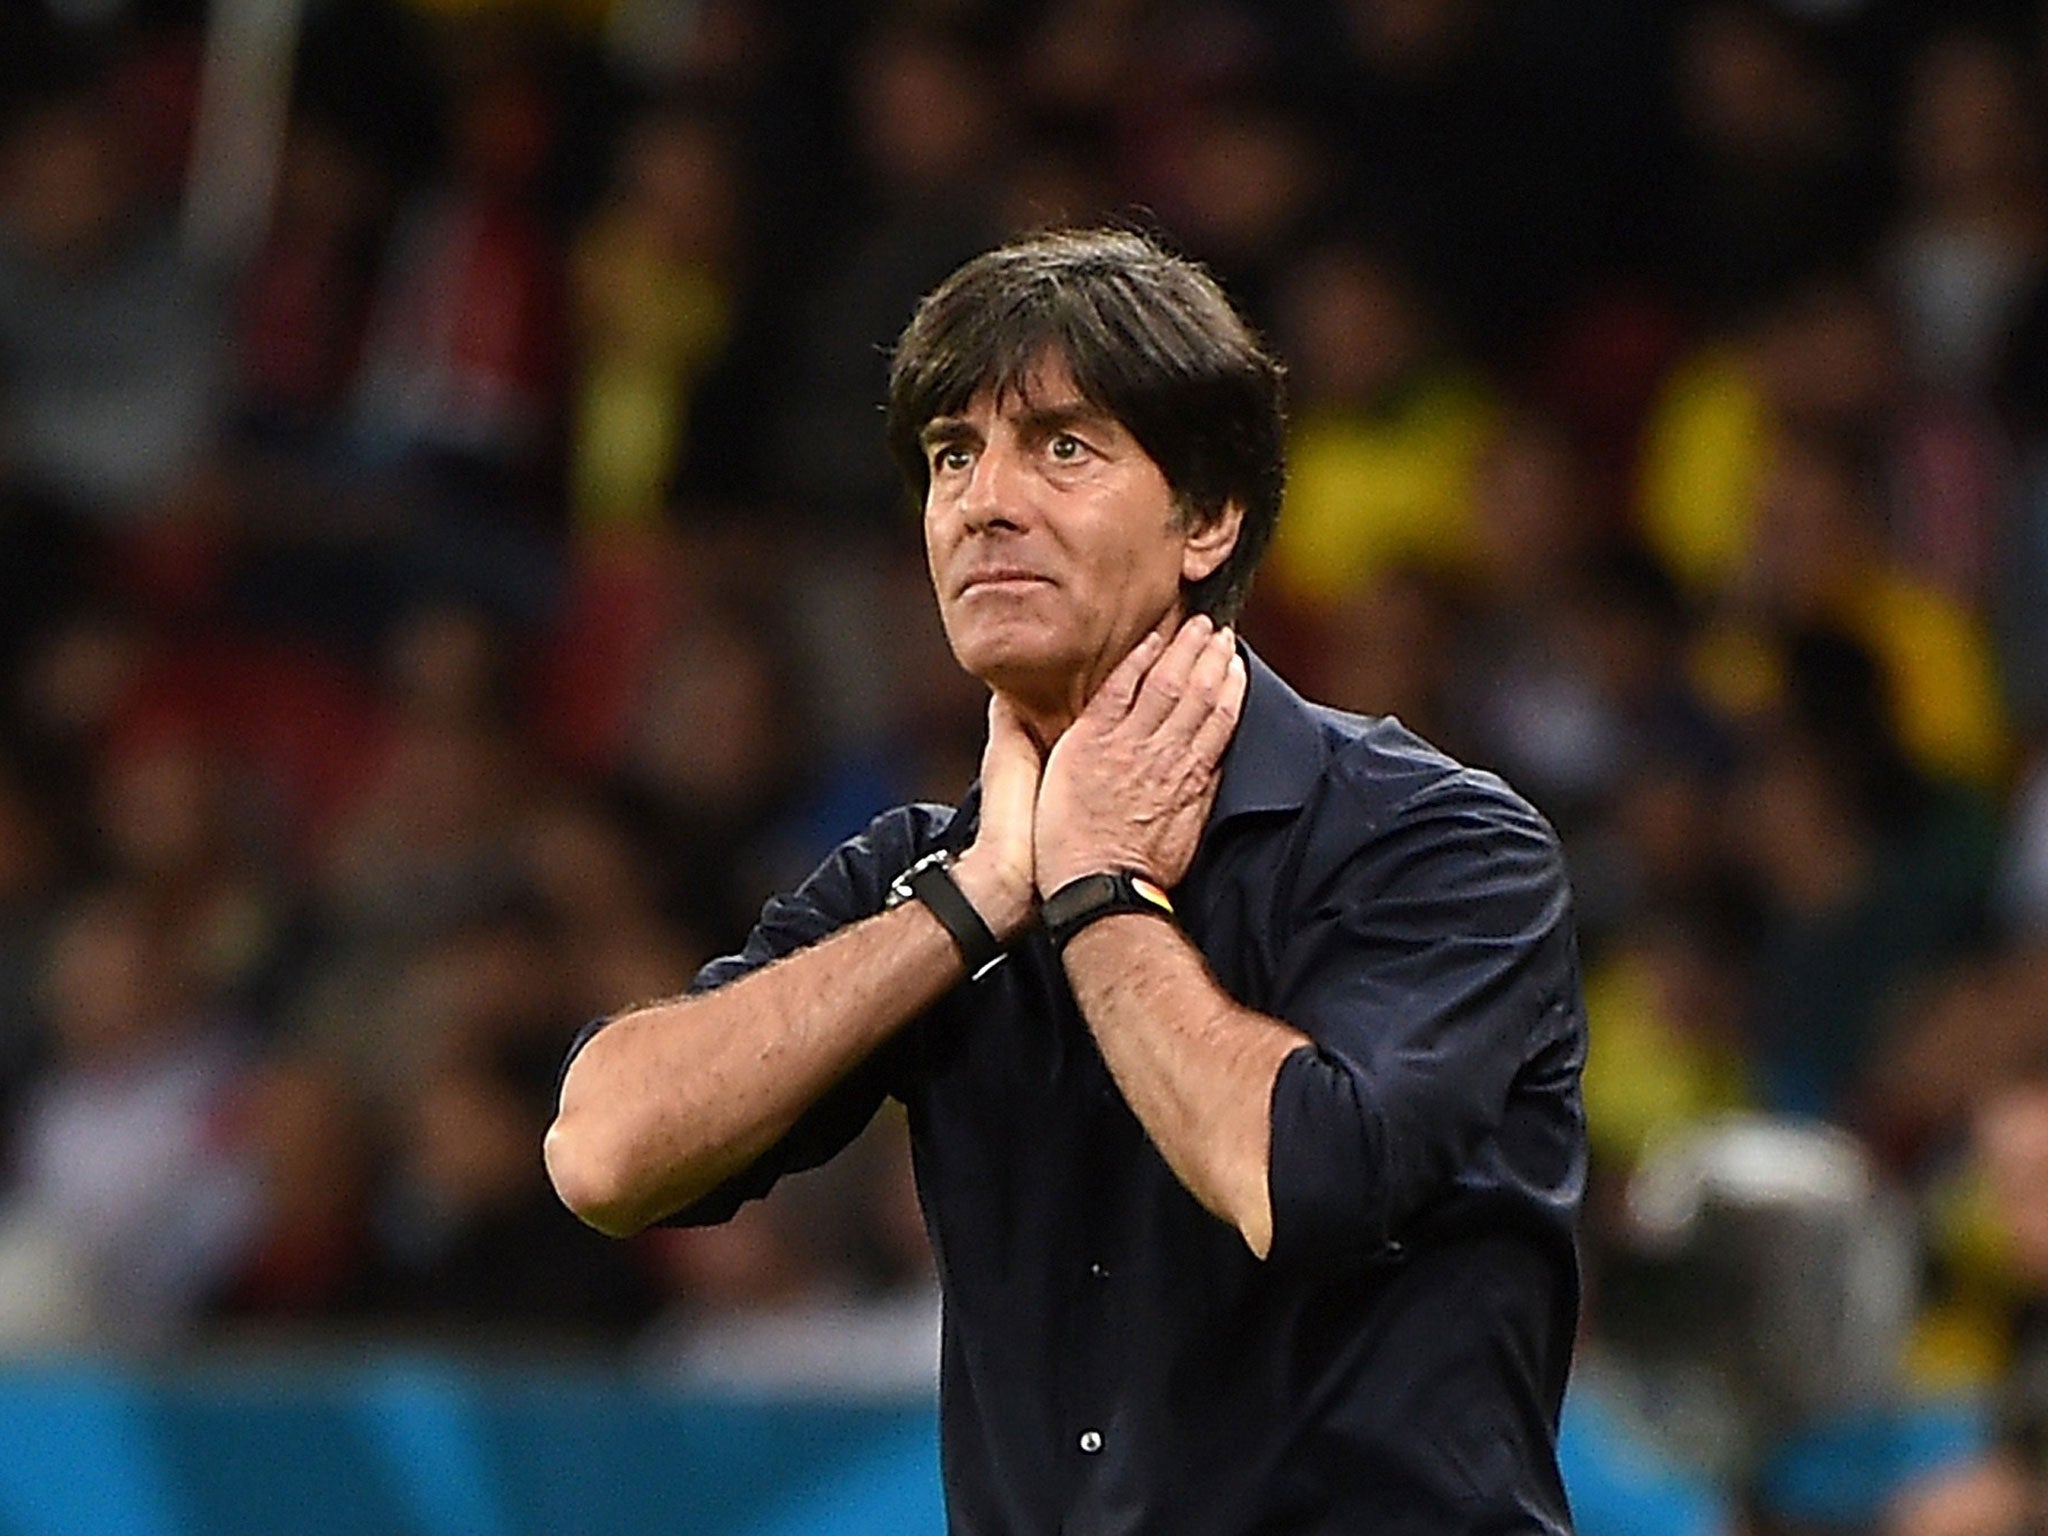 Joachim Löw’s team have played a much more
attacking and assertive style in this World Cup